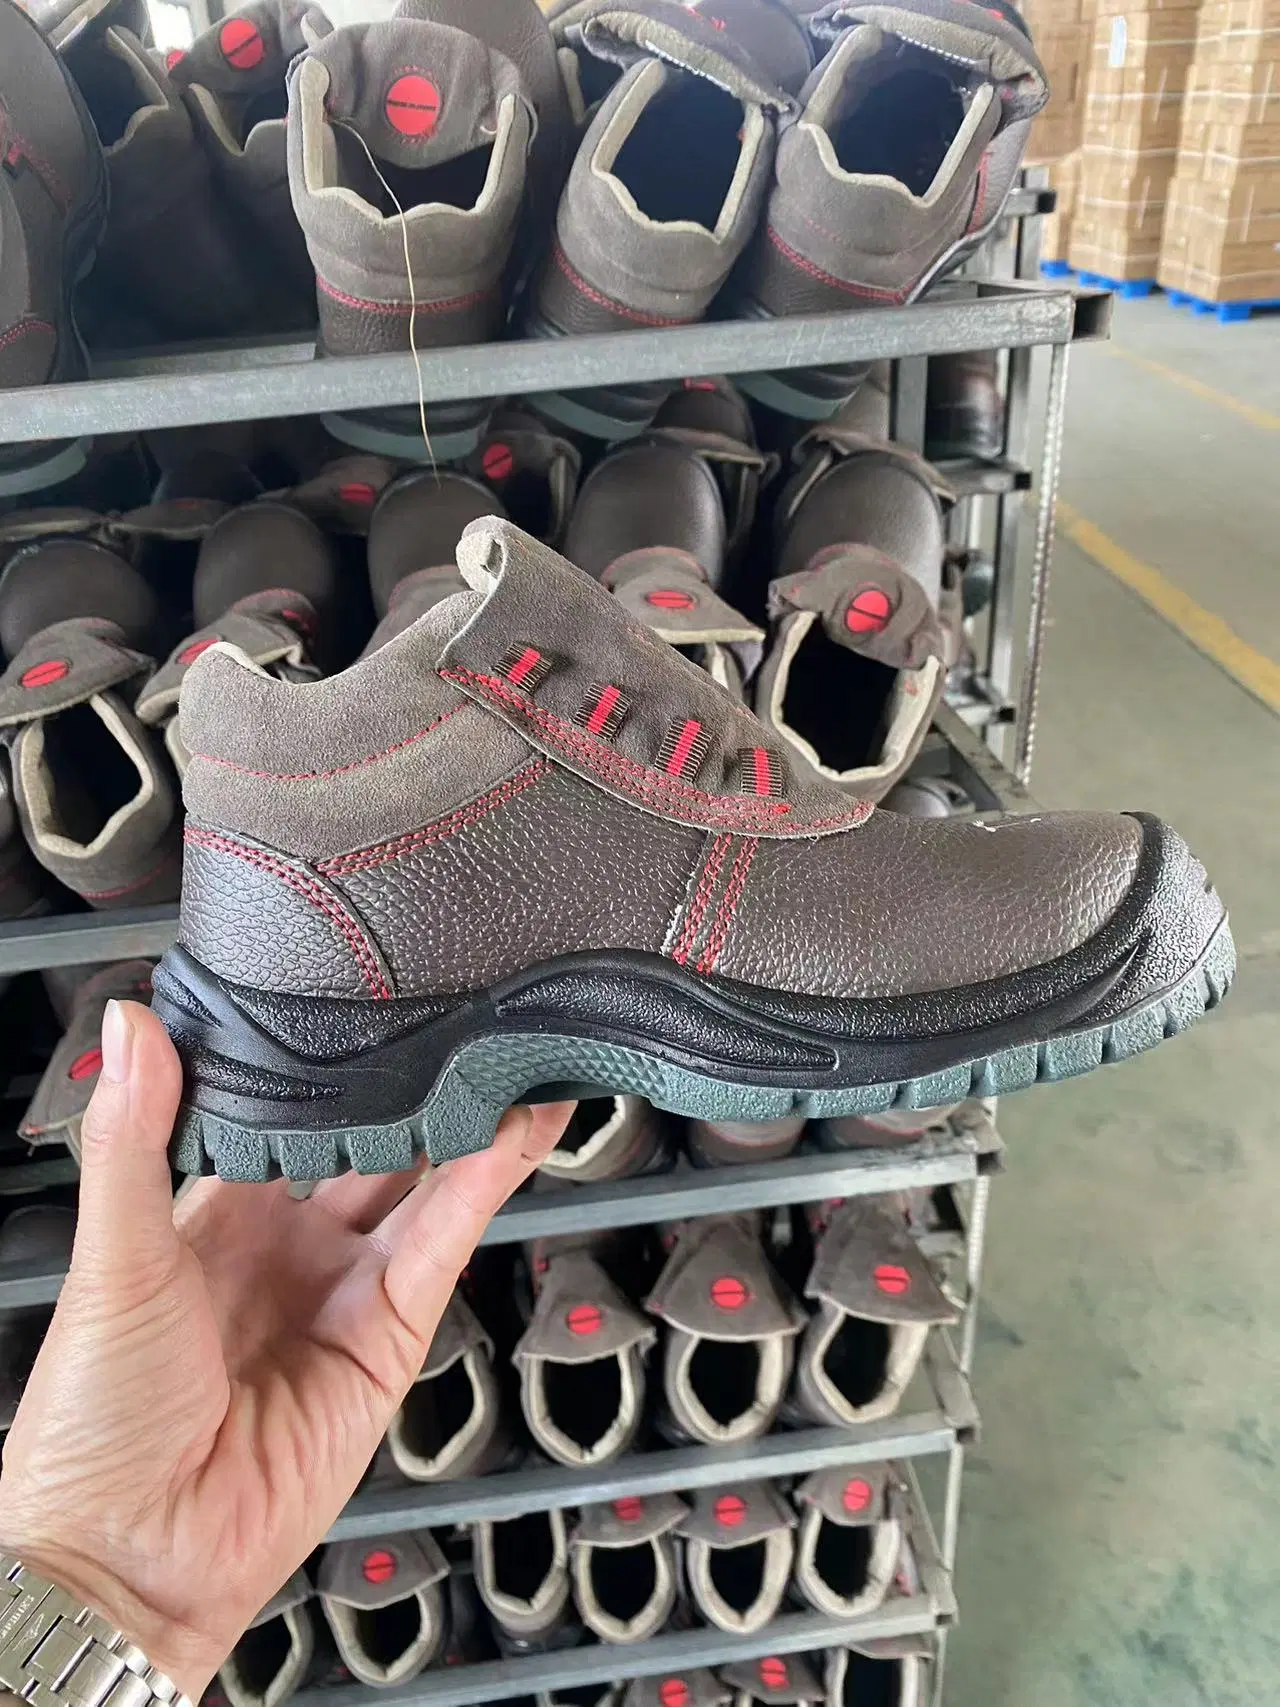 Workers' Work Shoes, Safety Shoes, Iron Head, Anti-Slip and Anti-Puncture